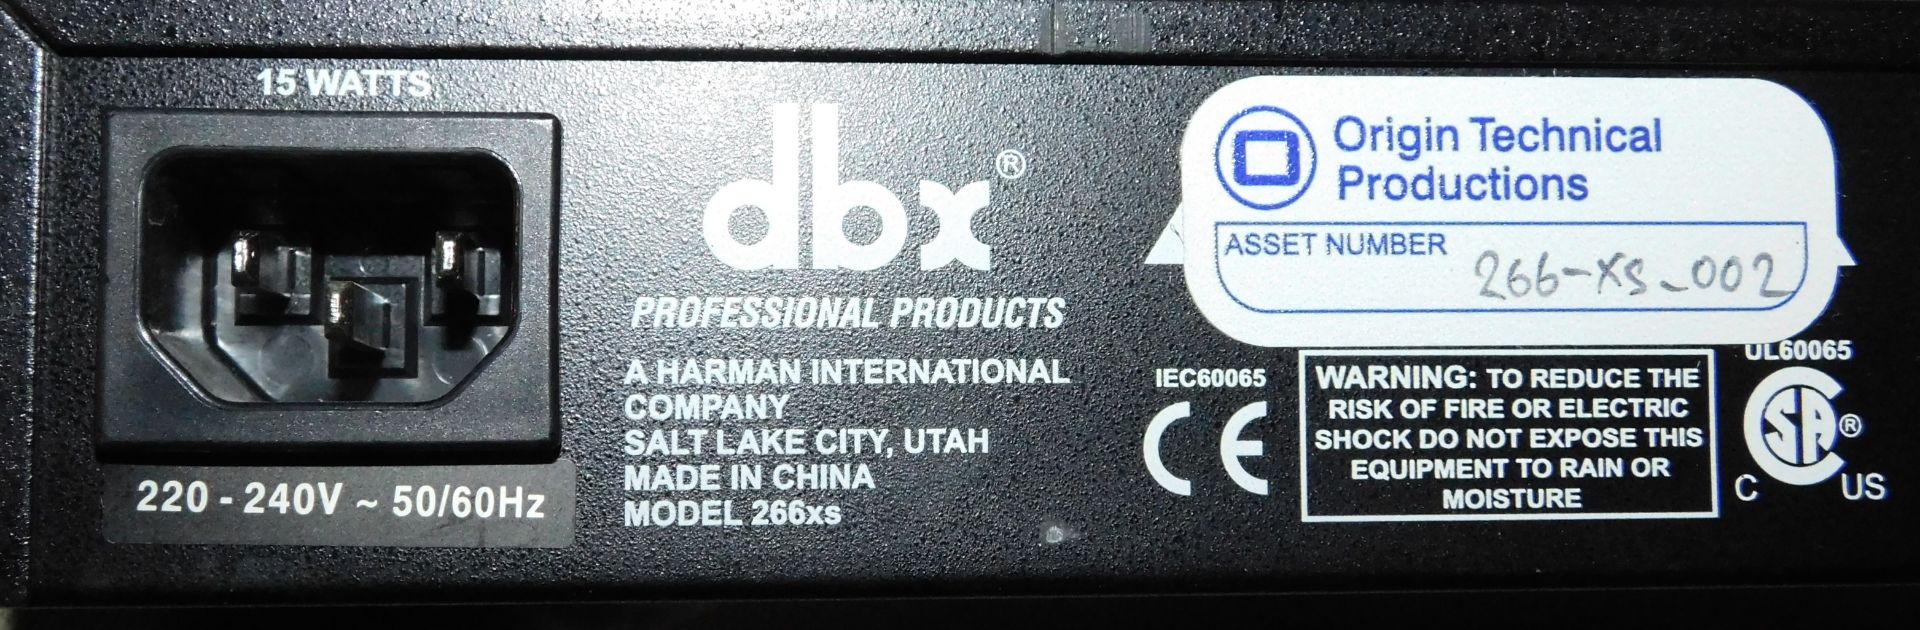 Alesis Midiverb 4 Advanced 24 Bit Fully Integrated Extended Range Signal Processing & DBX - Image 7 of 7